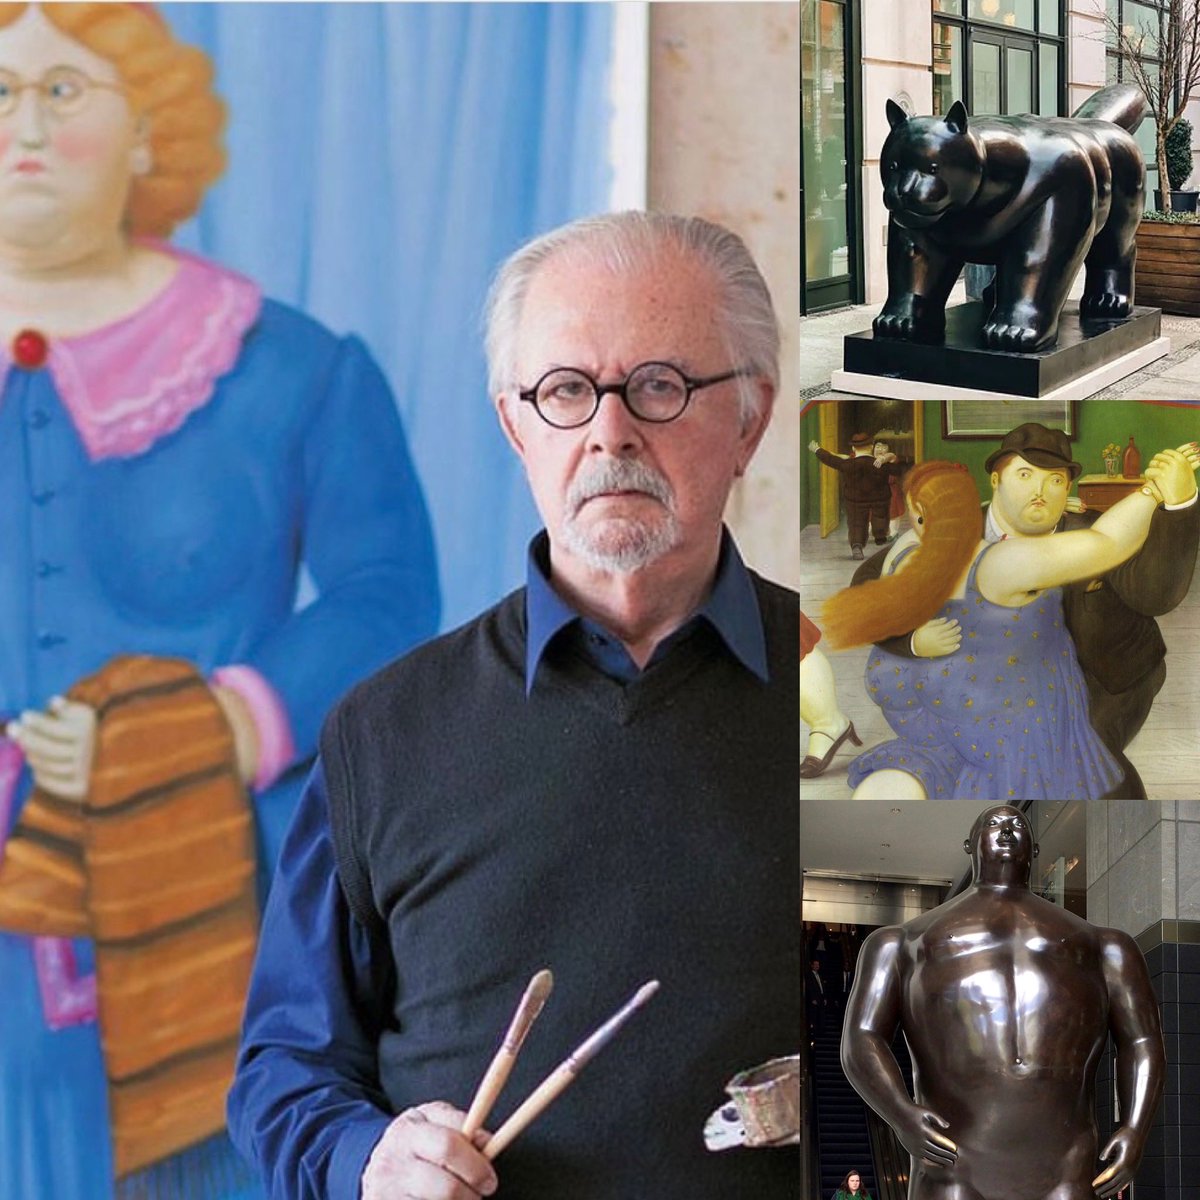 Fernando Botero, world renowned painter and sculptor has died at 91. One of the most important Latin American artists of our time, Rest in Peace. 🎨
#FernandoBotero #boterismo #colombianart #latinamericanart #titanstrongbox #printpak #sustainablepackaging